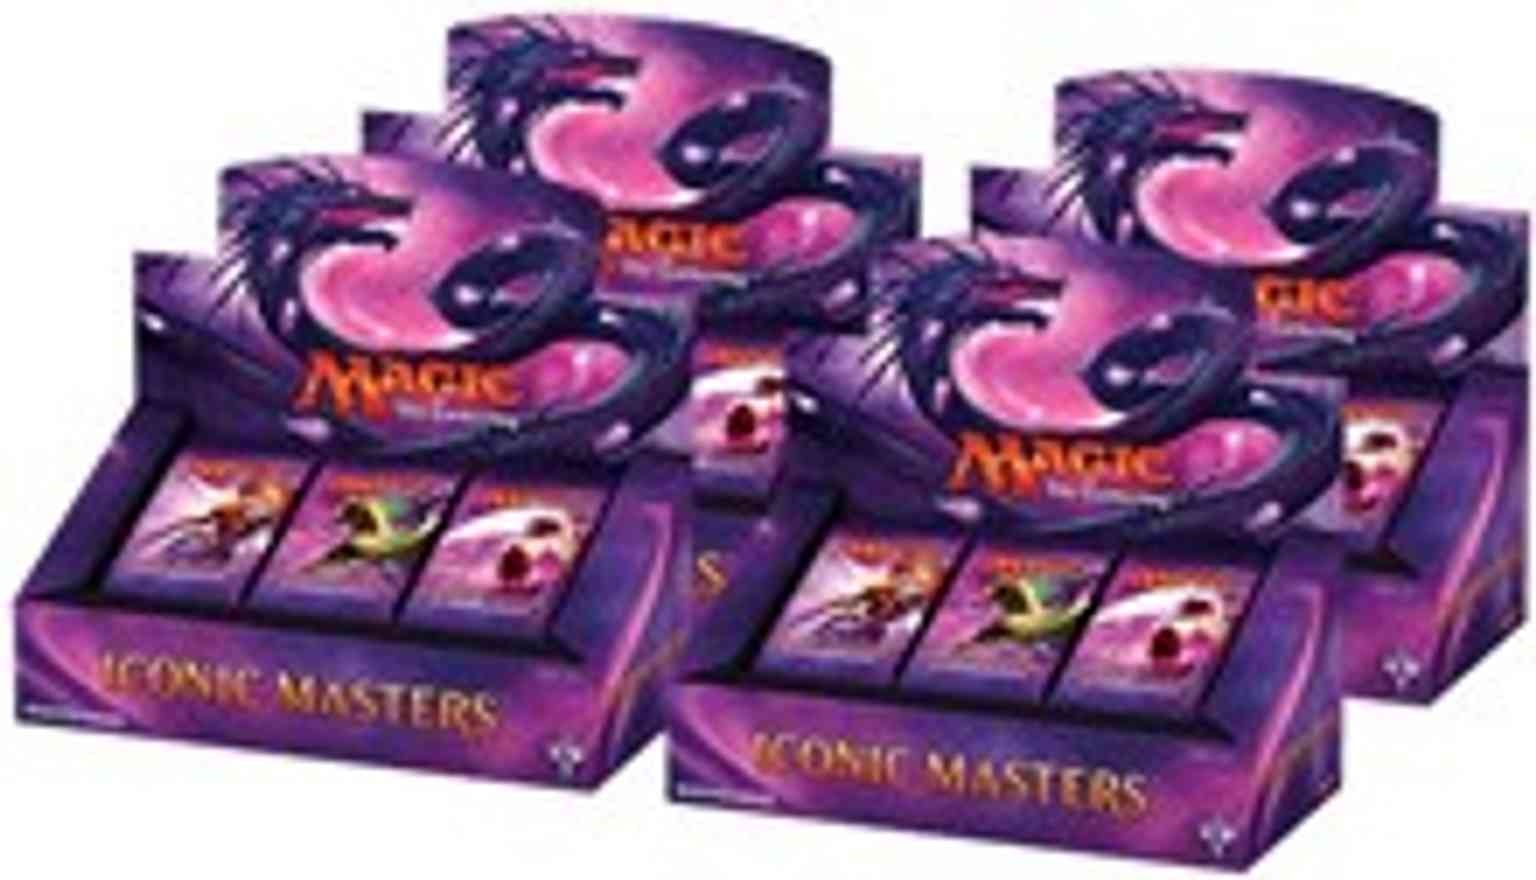 Iconic Masters - Booster Box Case magic card front